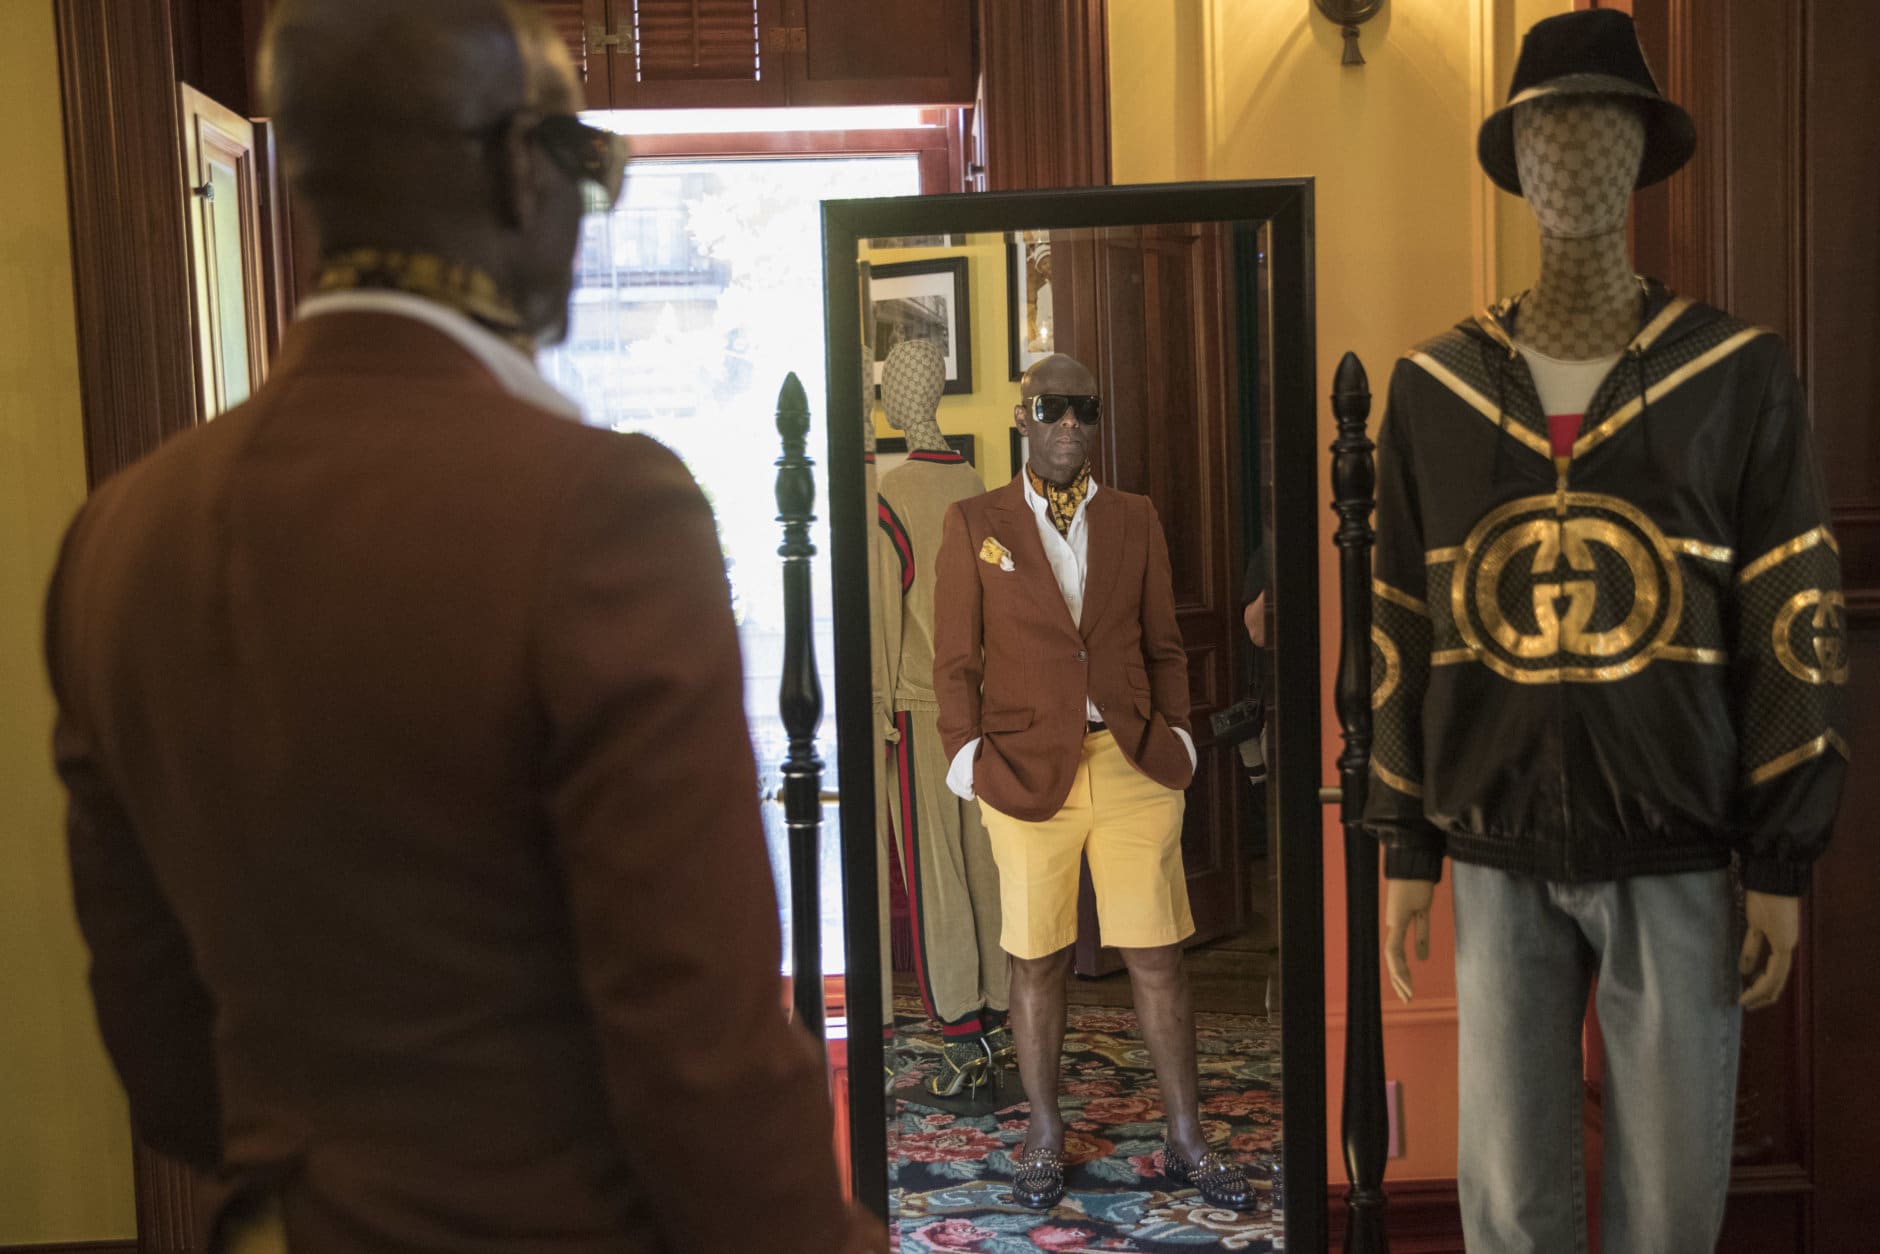 In this Thursday, July 19, 2018 photo, designer Dapper Dan is seen at his atelier in the Harlem neighborhood of New York. Harlem designer Dapper Dan spent years in the 1980s with a client list that included the who's who of hip-hop before legal issues over the clothes he was making got in the way. Now the fashion groundbreaker is back after more than two decades out of the public eye. He's got a partnership with Gucci and the likes of superstar entertainer Beyonce among those wearing his designs. (AP Photo/Mary Altaffer)